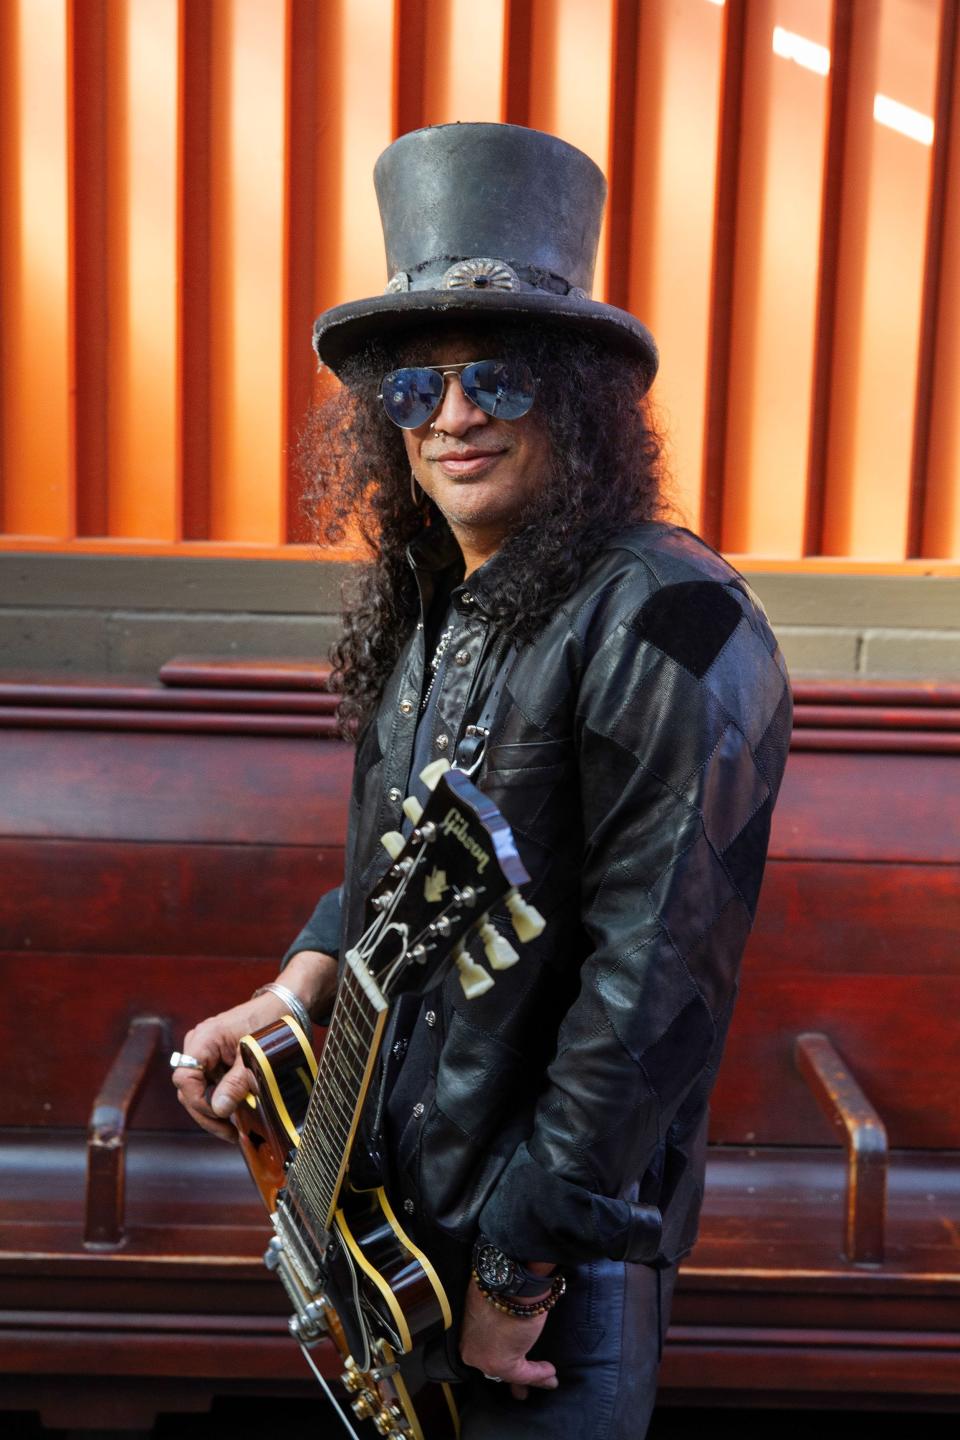 Rock guitarist Slash, pictured here with his Gibson ES-335 guitar.